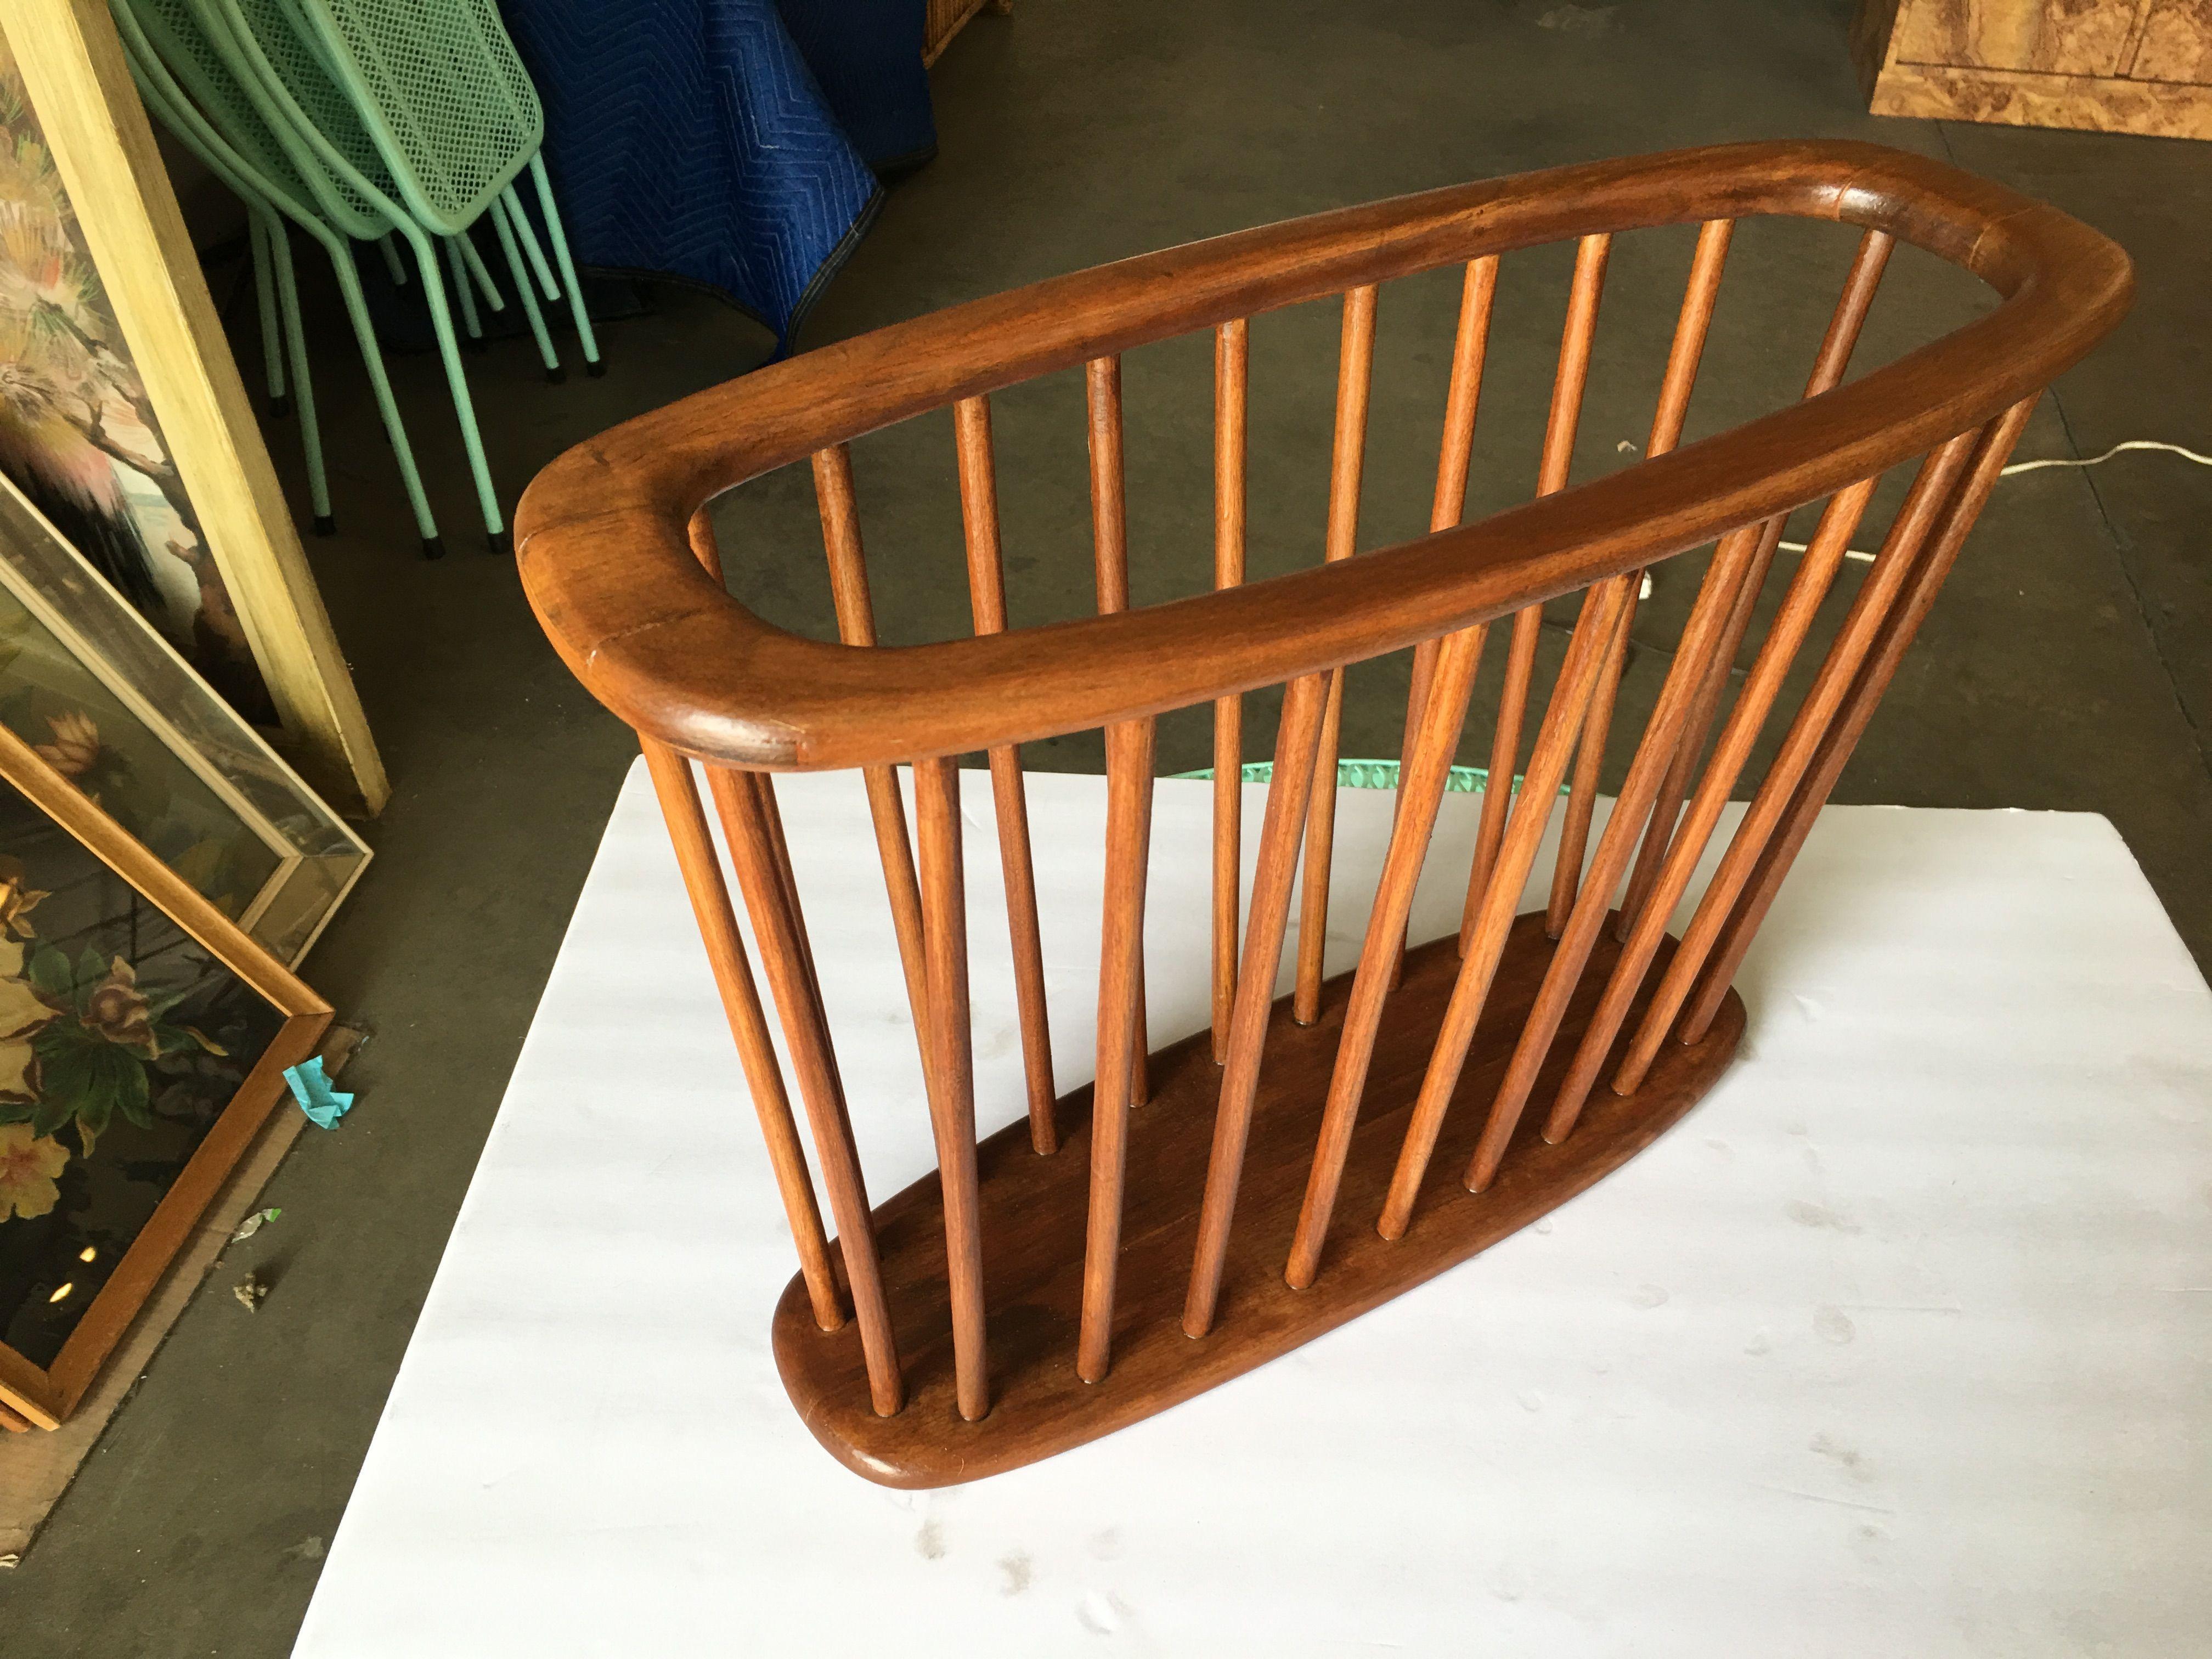 Vintage 1960 Danish Mid Century Modern teak spindle magazine rack by Arthur Umanoff featuring a wide oval top held up by a spindle form.